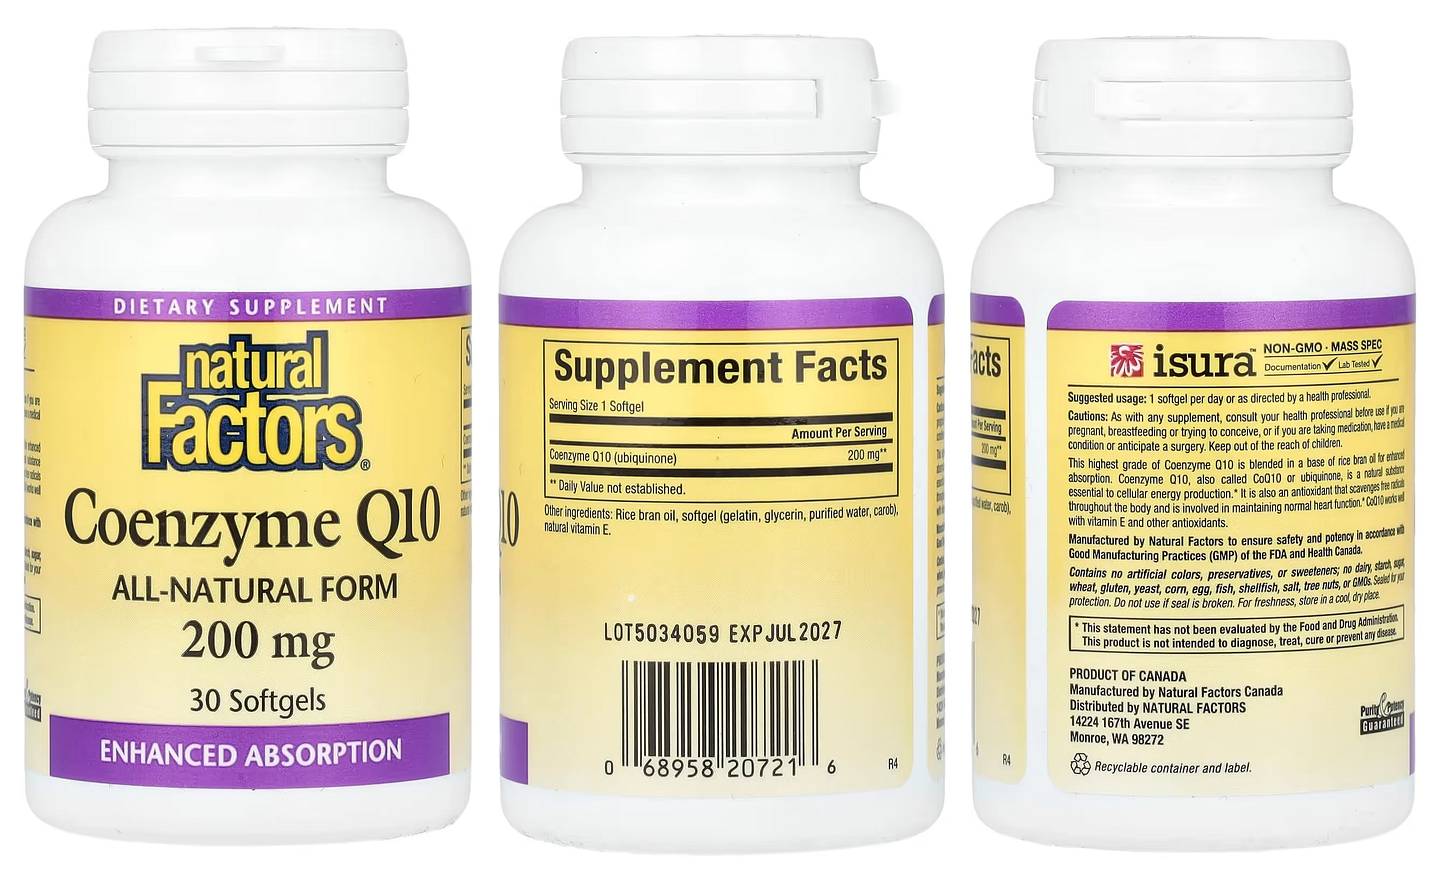 Natural Factors, Coenzyme Q10 packaging